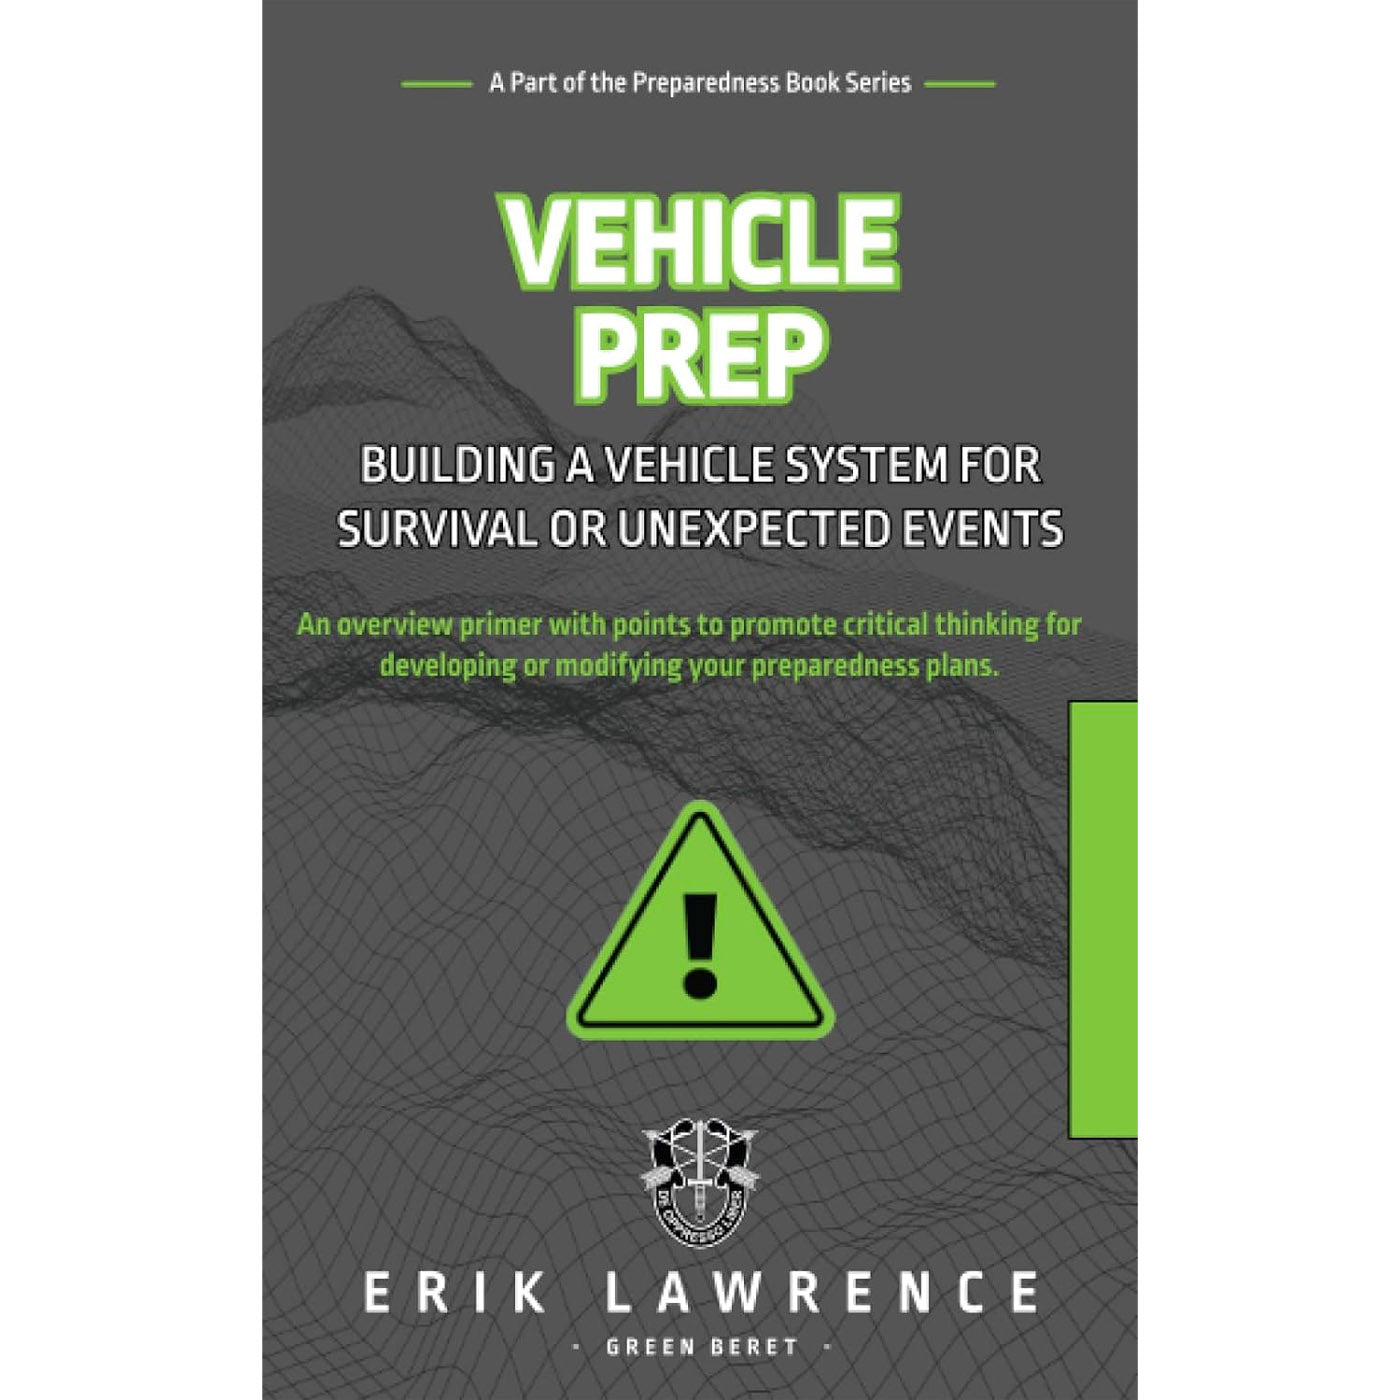 Vehicle Prep: Building a Vehicle System for Survival or Unexpected Events